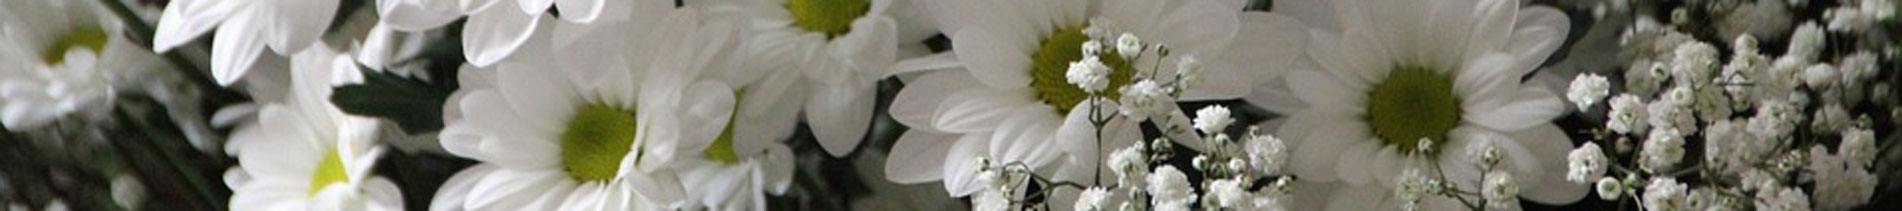 funeral flowers banner